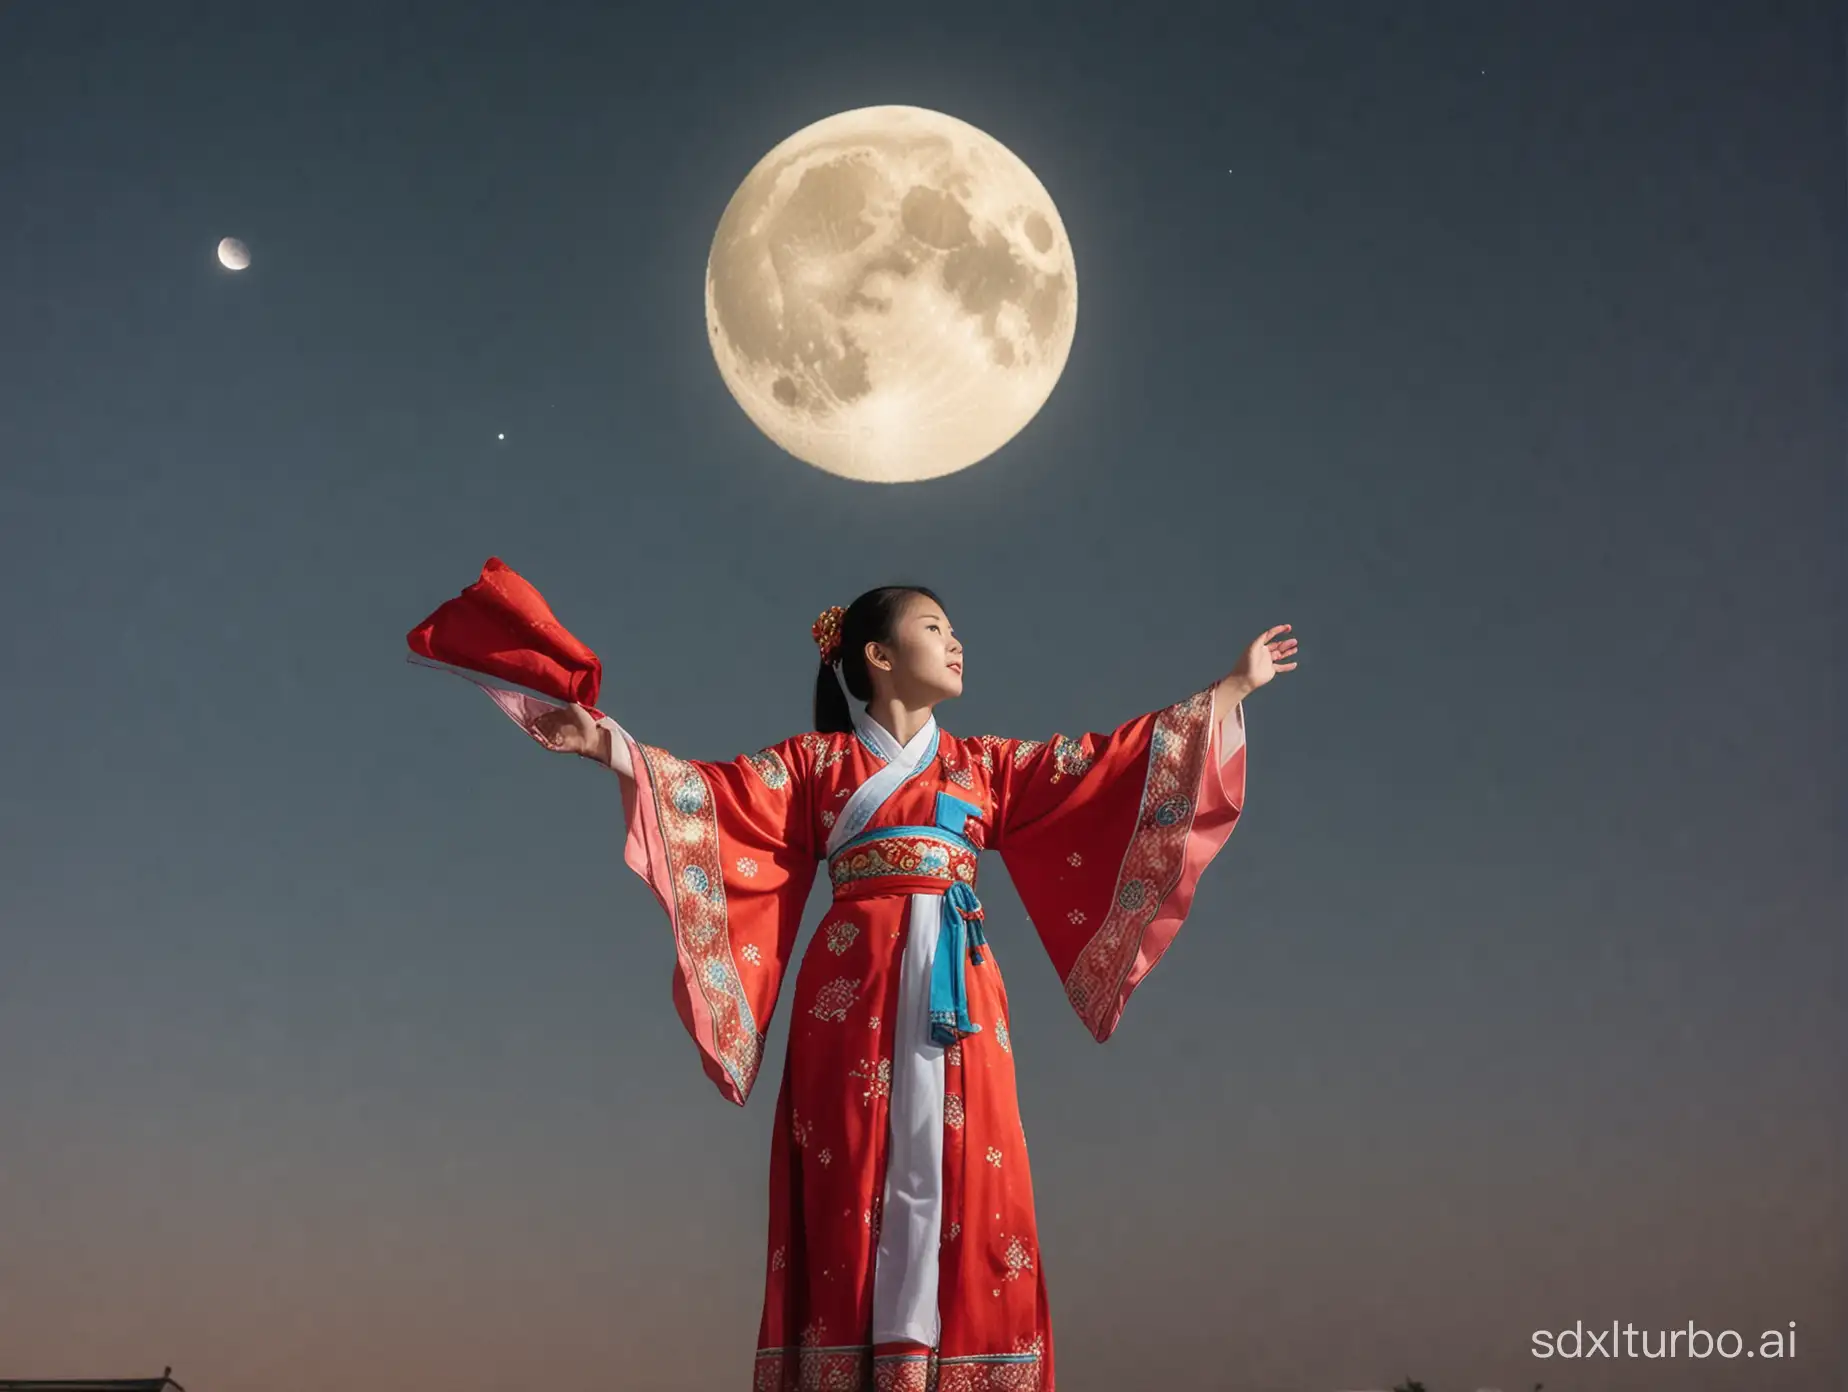 1 girl with Chinese traditional clothing look up at three moons in the sky